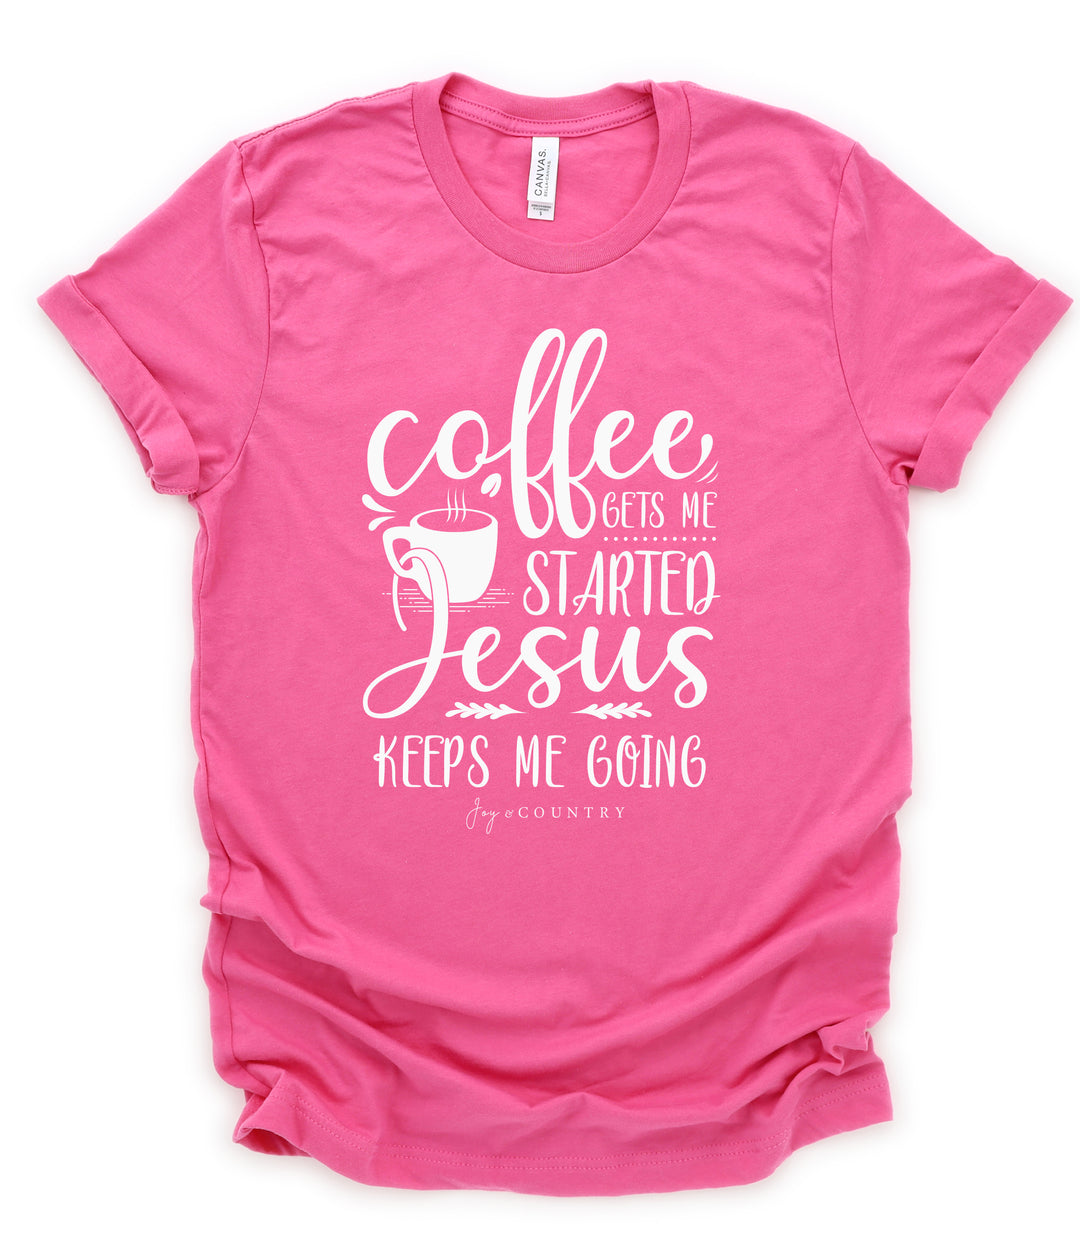 Coffee Gets Me Started, Jesus Keeps Me Going - Unisex Crew-Neck Tee - Joy & Country